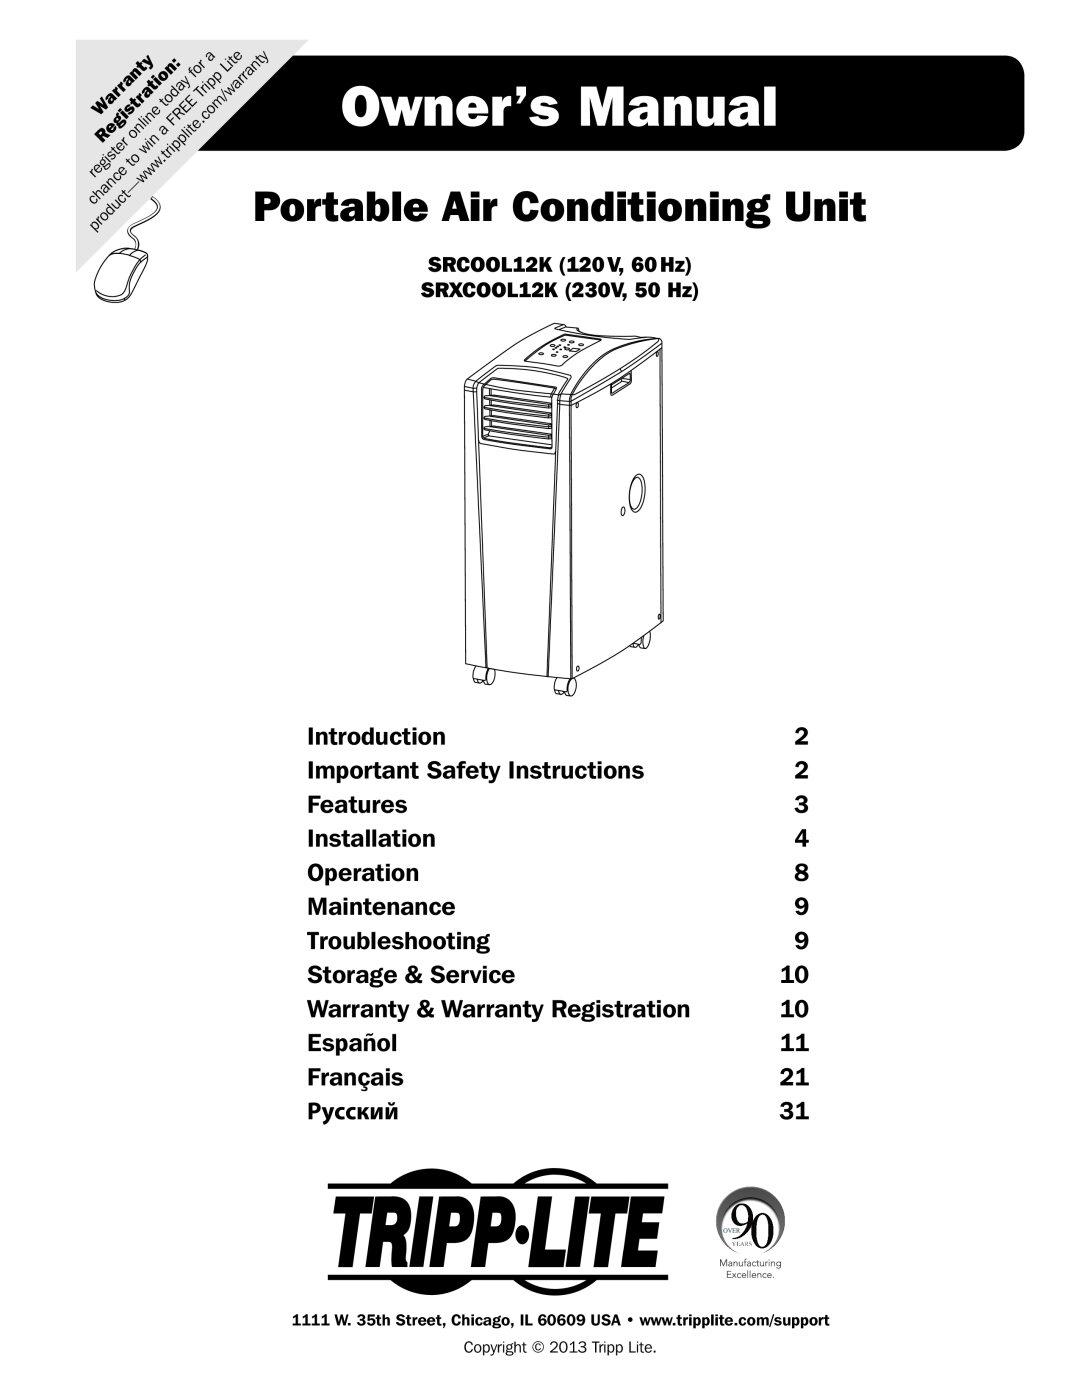 Tripp Lite SRCOOL12K, SRXCOOL12K owner manual Portable Air Conditioning Unit, Owner’s Manual 